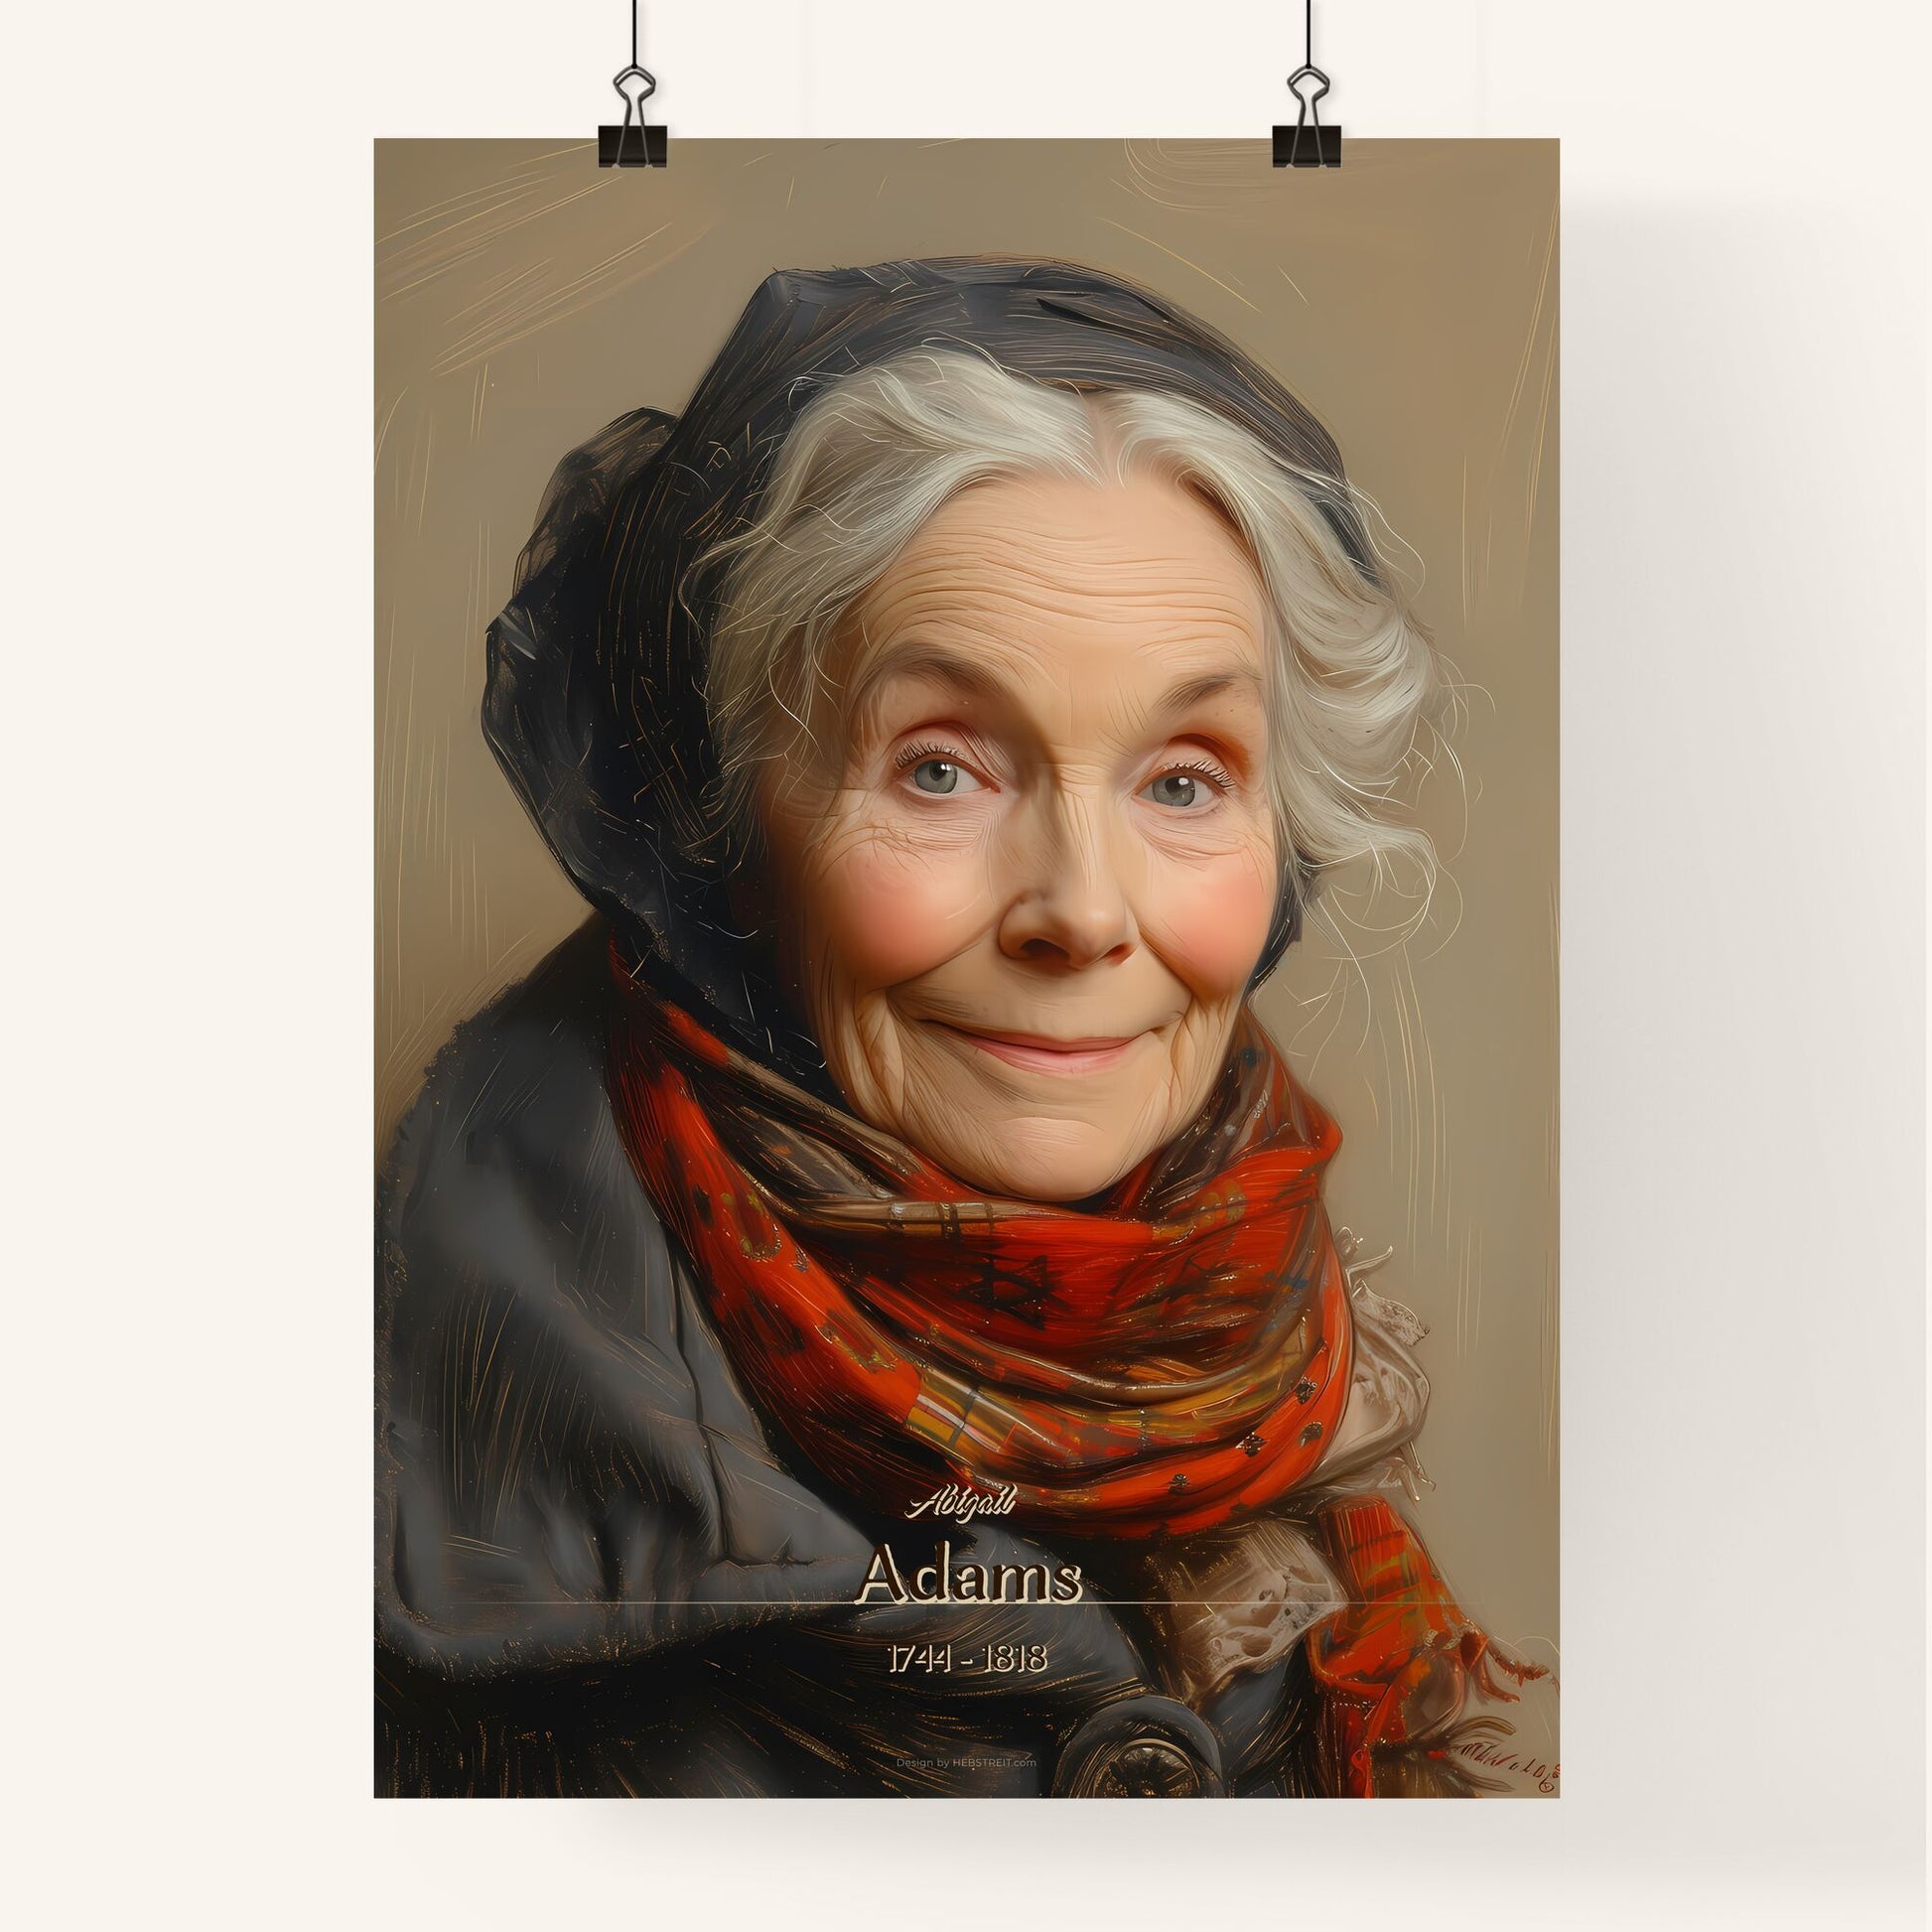 Abigail, Adams, 1744 - 1818, A Poster of a woman with white hair and a scarf Default Title